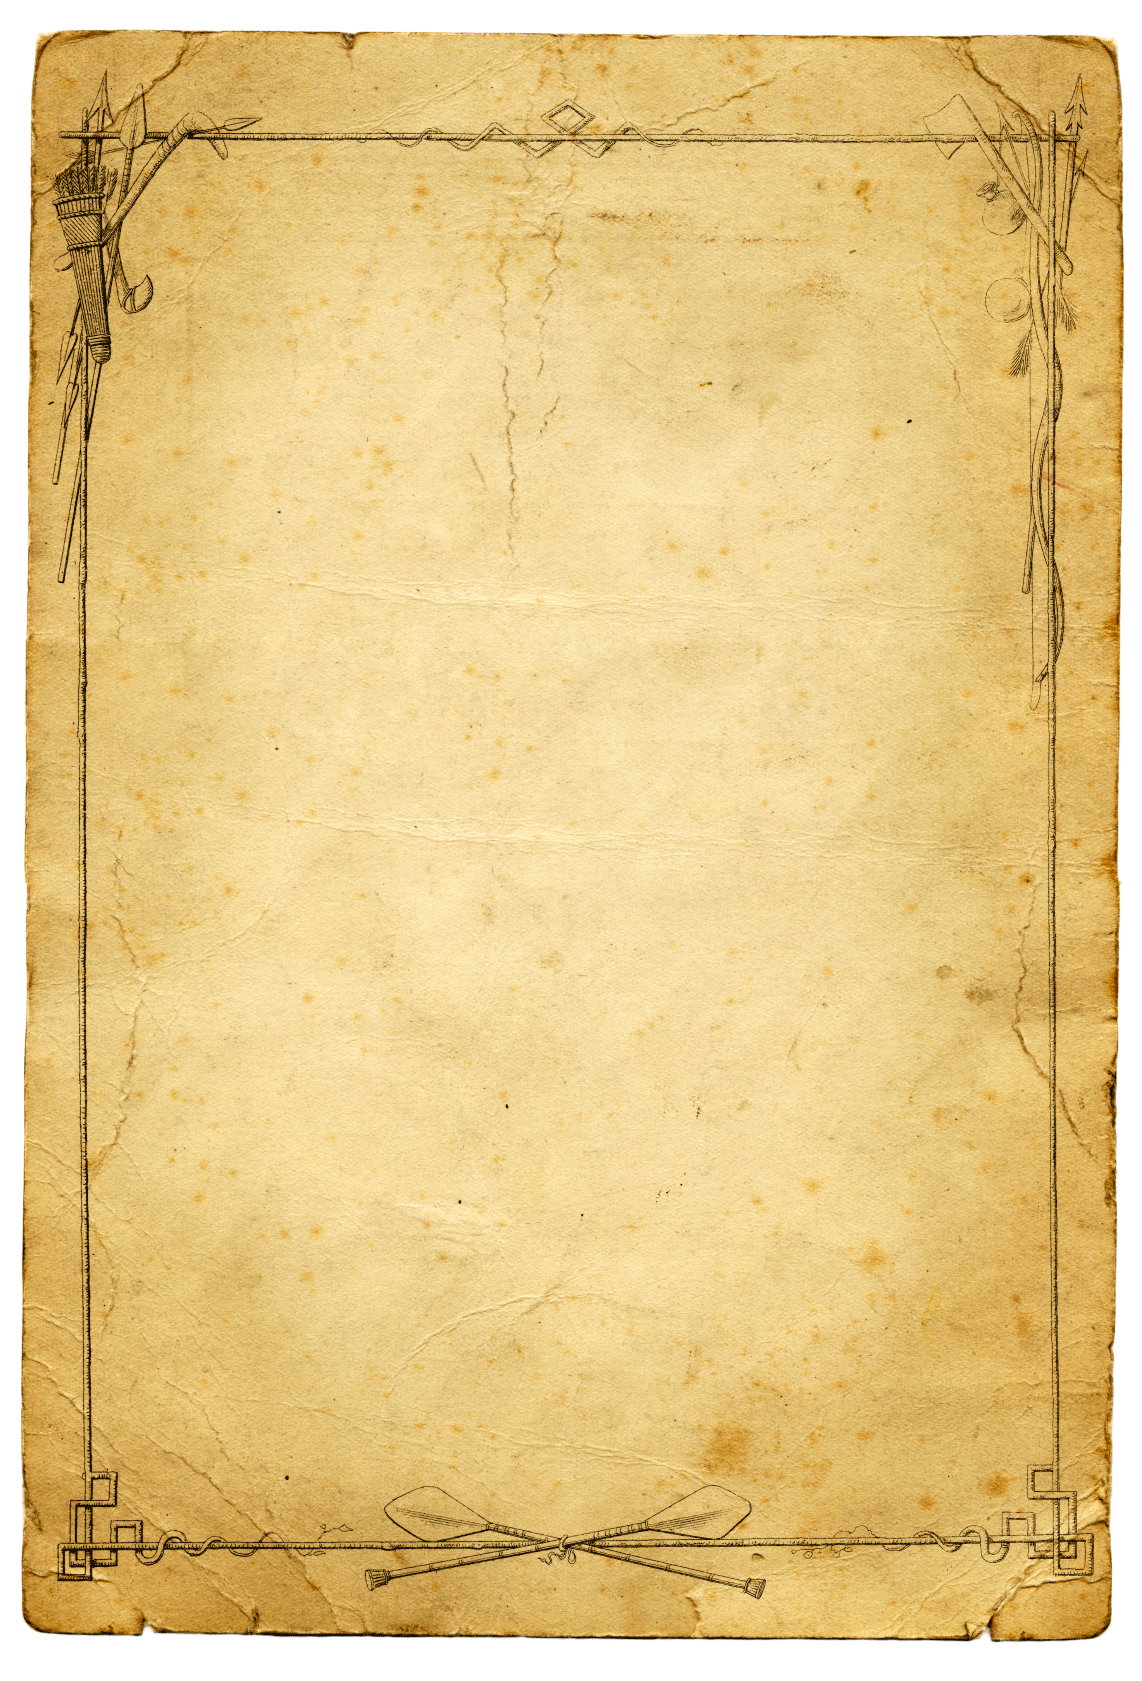 Background For Inside Cover - Old Paper Background For Word - HD Wallpaper 